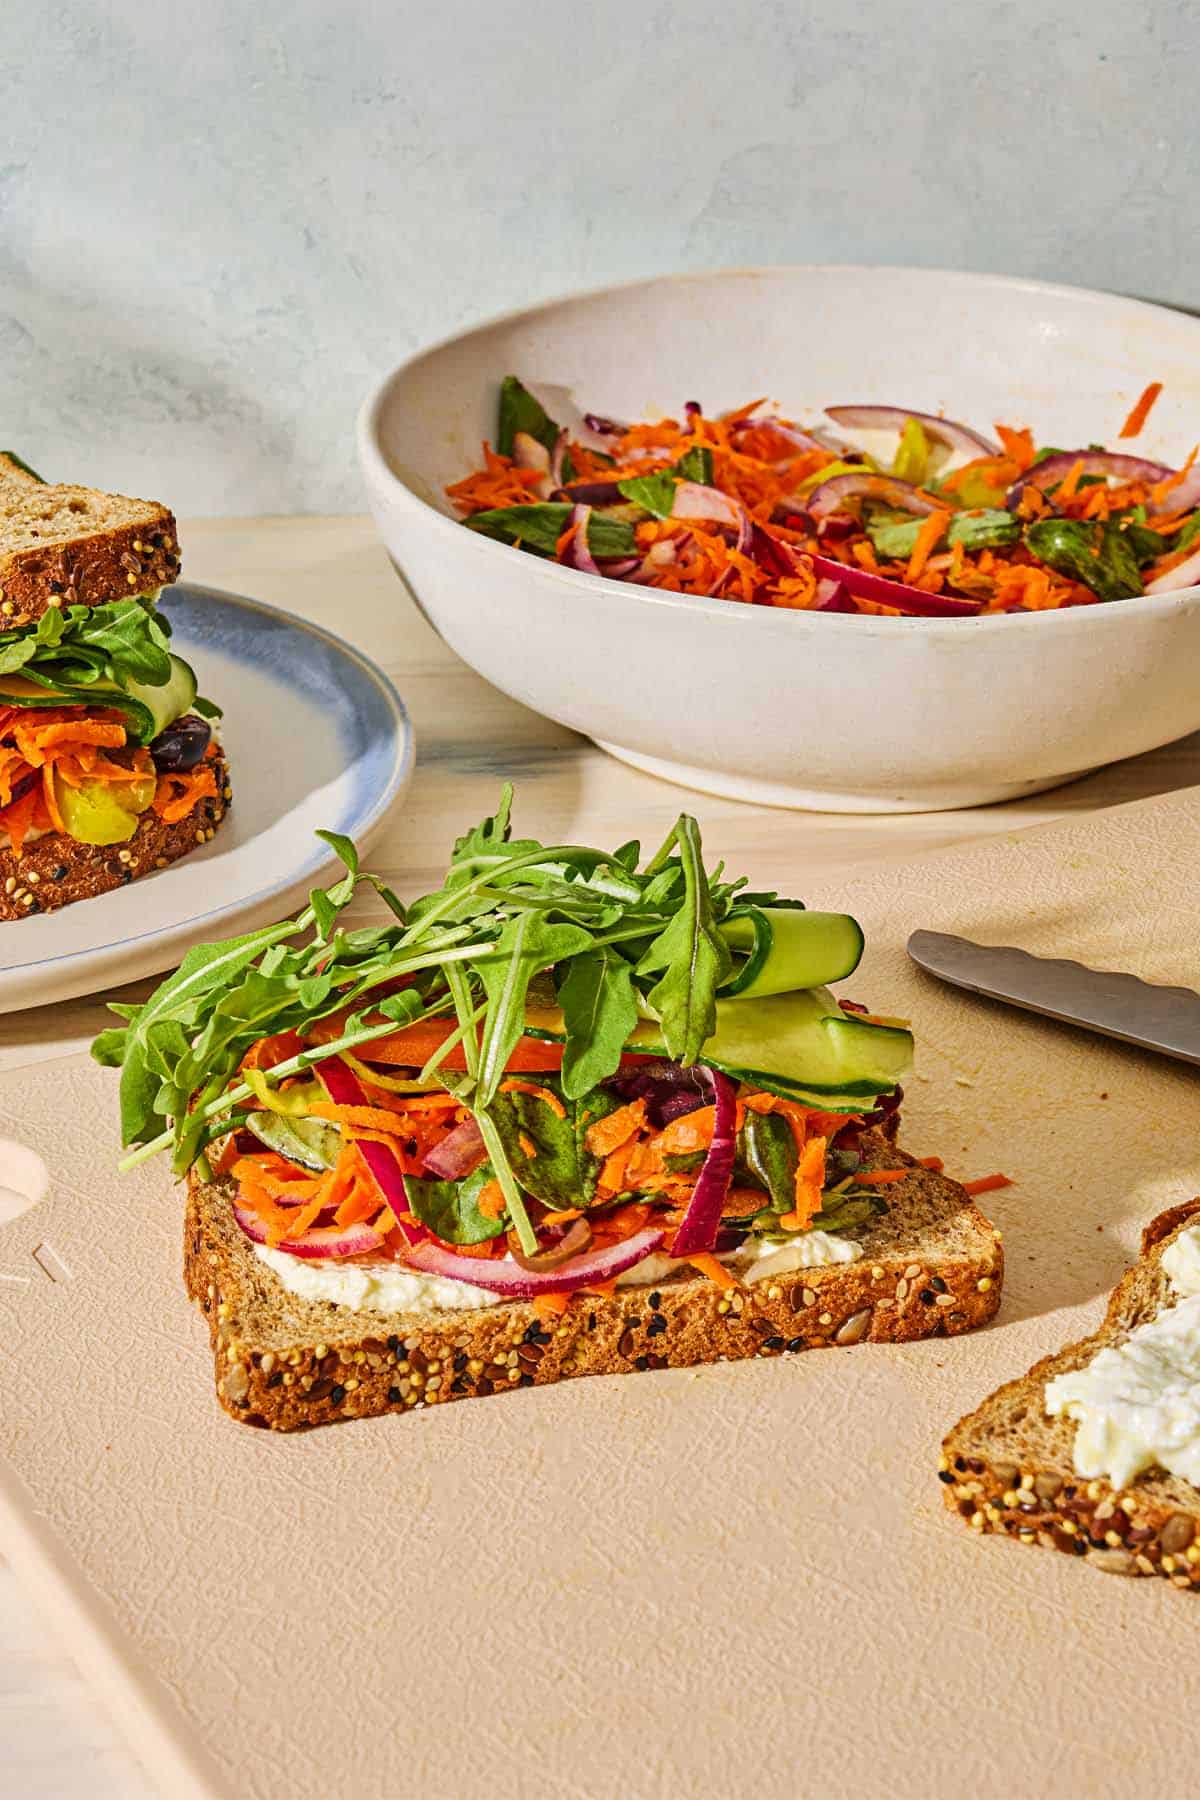 A piece of toast with the whipped feta spread and the Greek-style slaw on a cutting board with a knife. Next to this is a veggie sandwich on a plate and the rest of the slaw in a bowl.